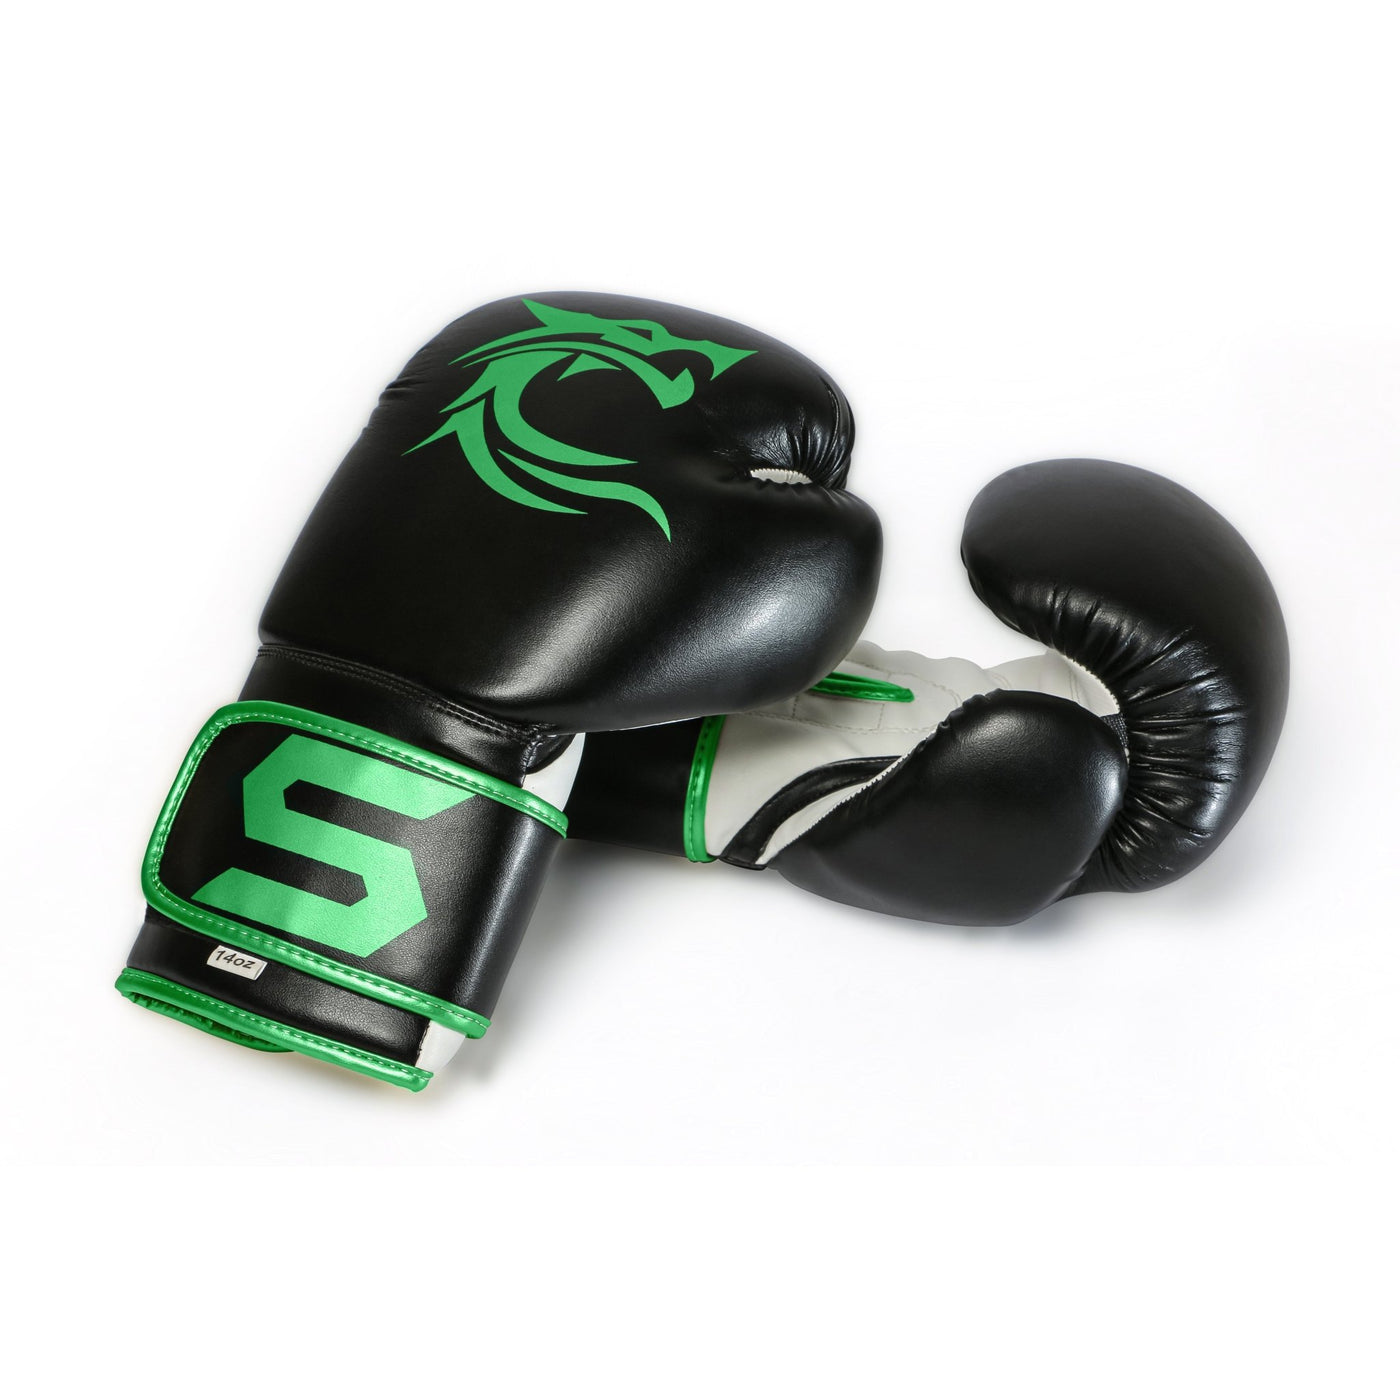 Dragon Green Leather Boxing Training Gloves - Summo Sports